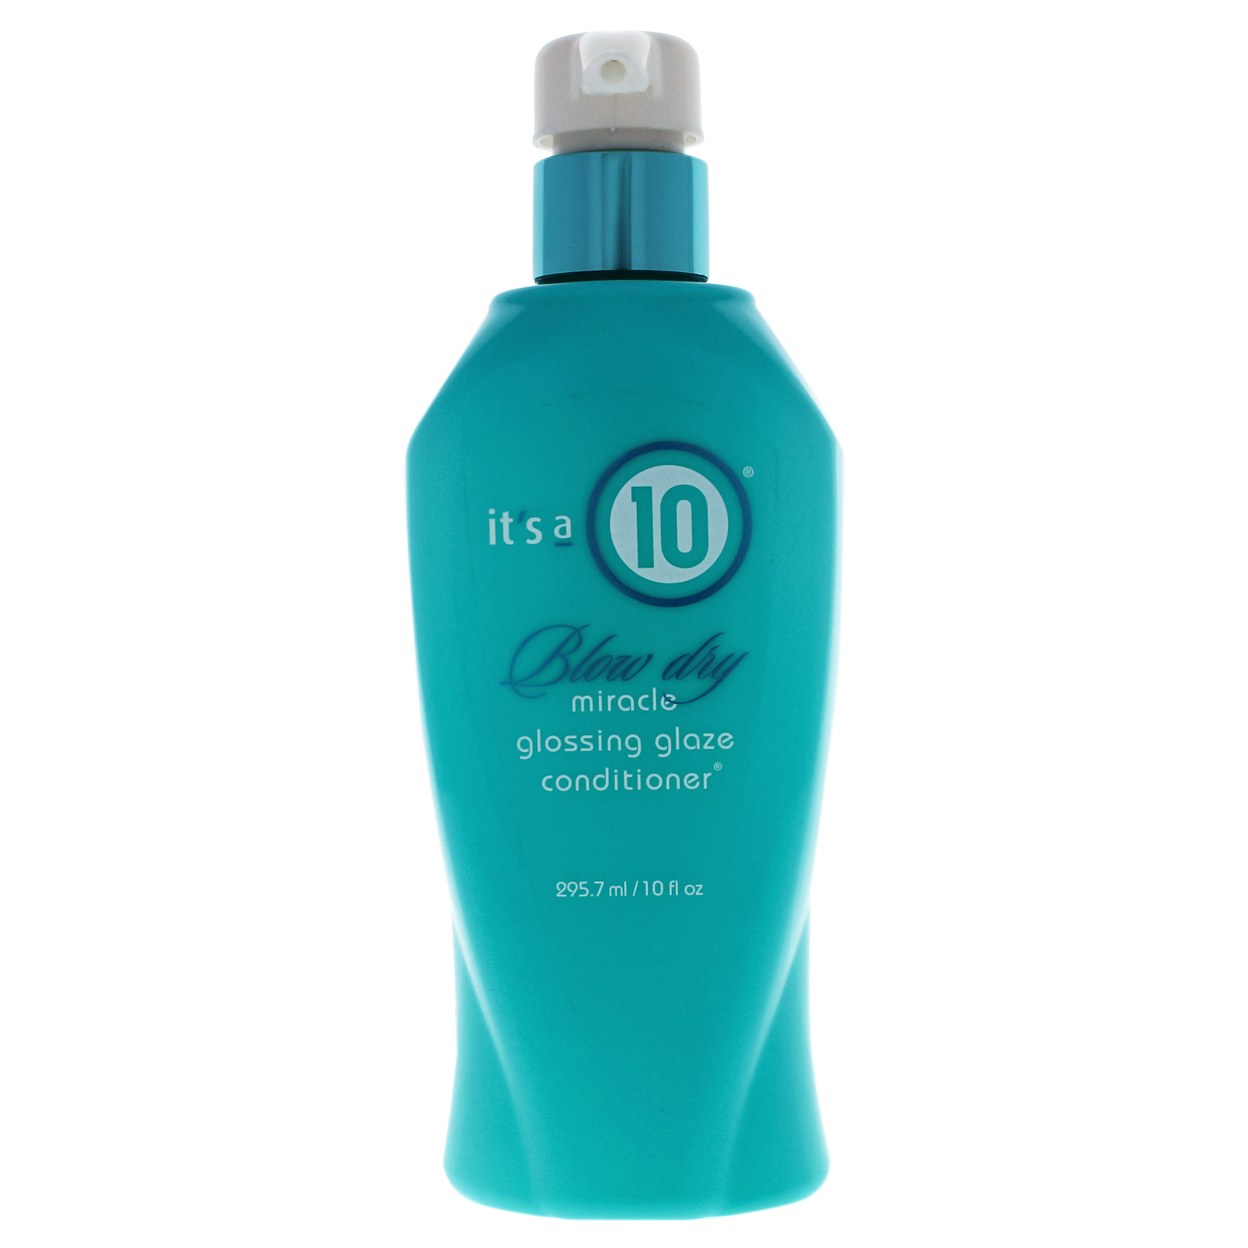 It's A 10 Unisex HAIRCARE Miracle Blow Dry Glossing Conditioner 10 Oz